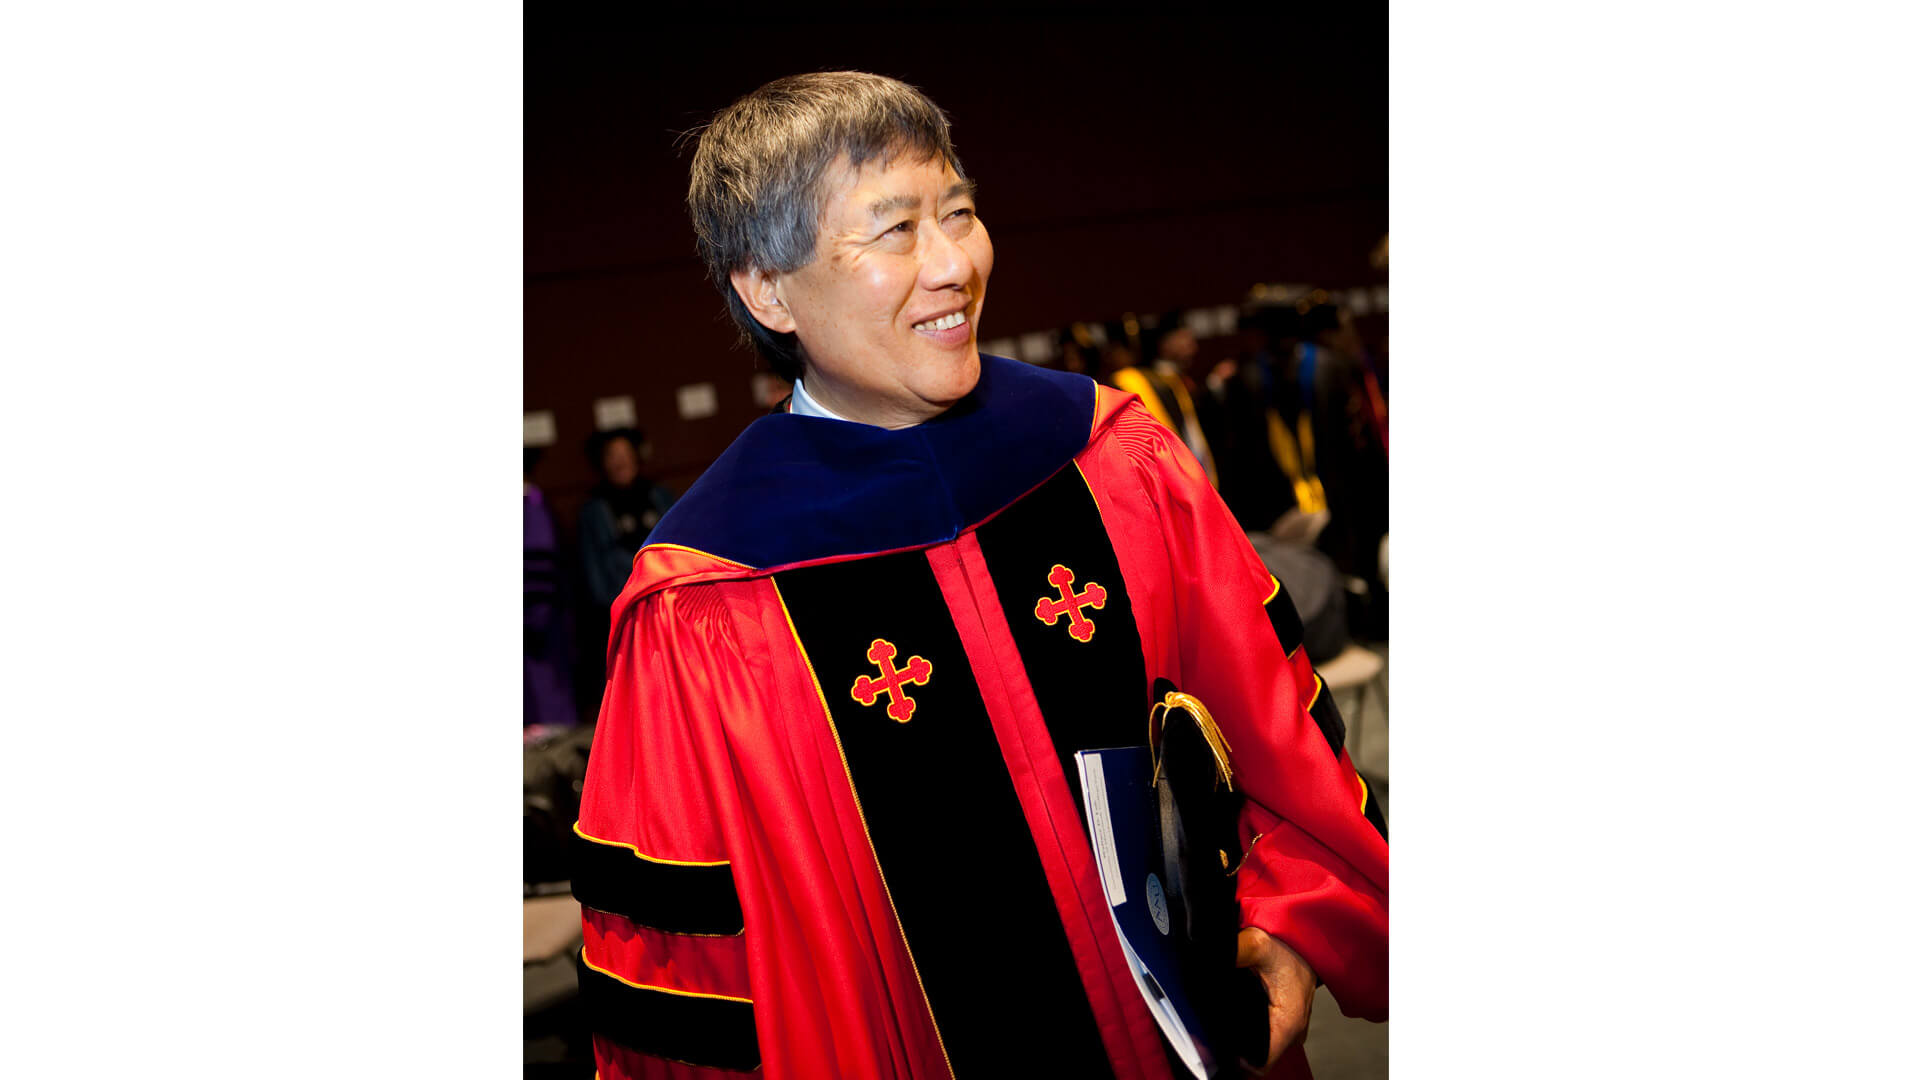 Wallace D. Loh at his inauguration ceremony